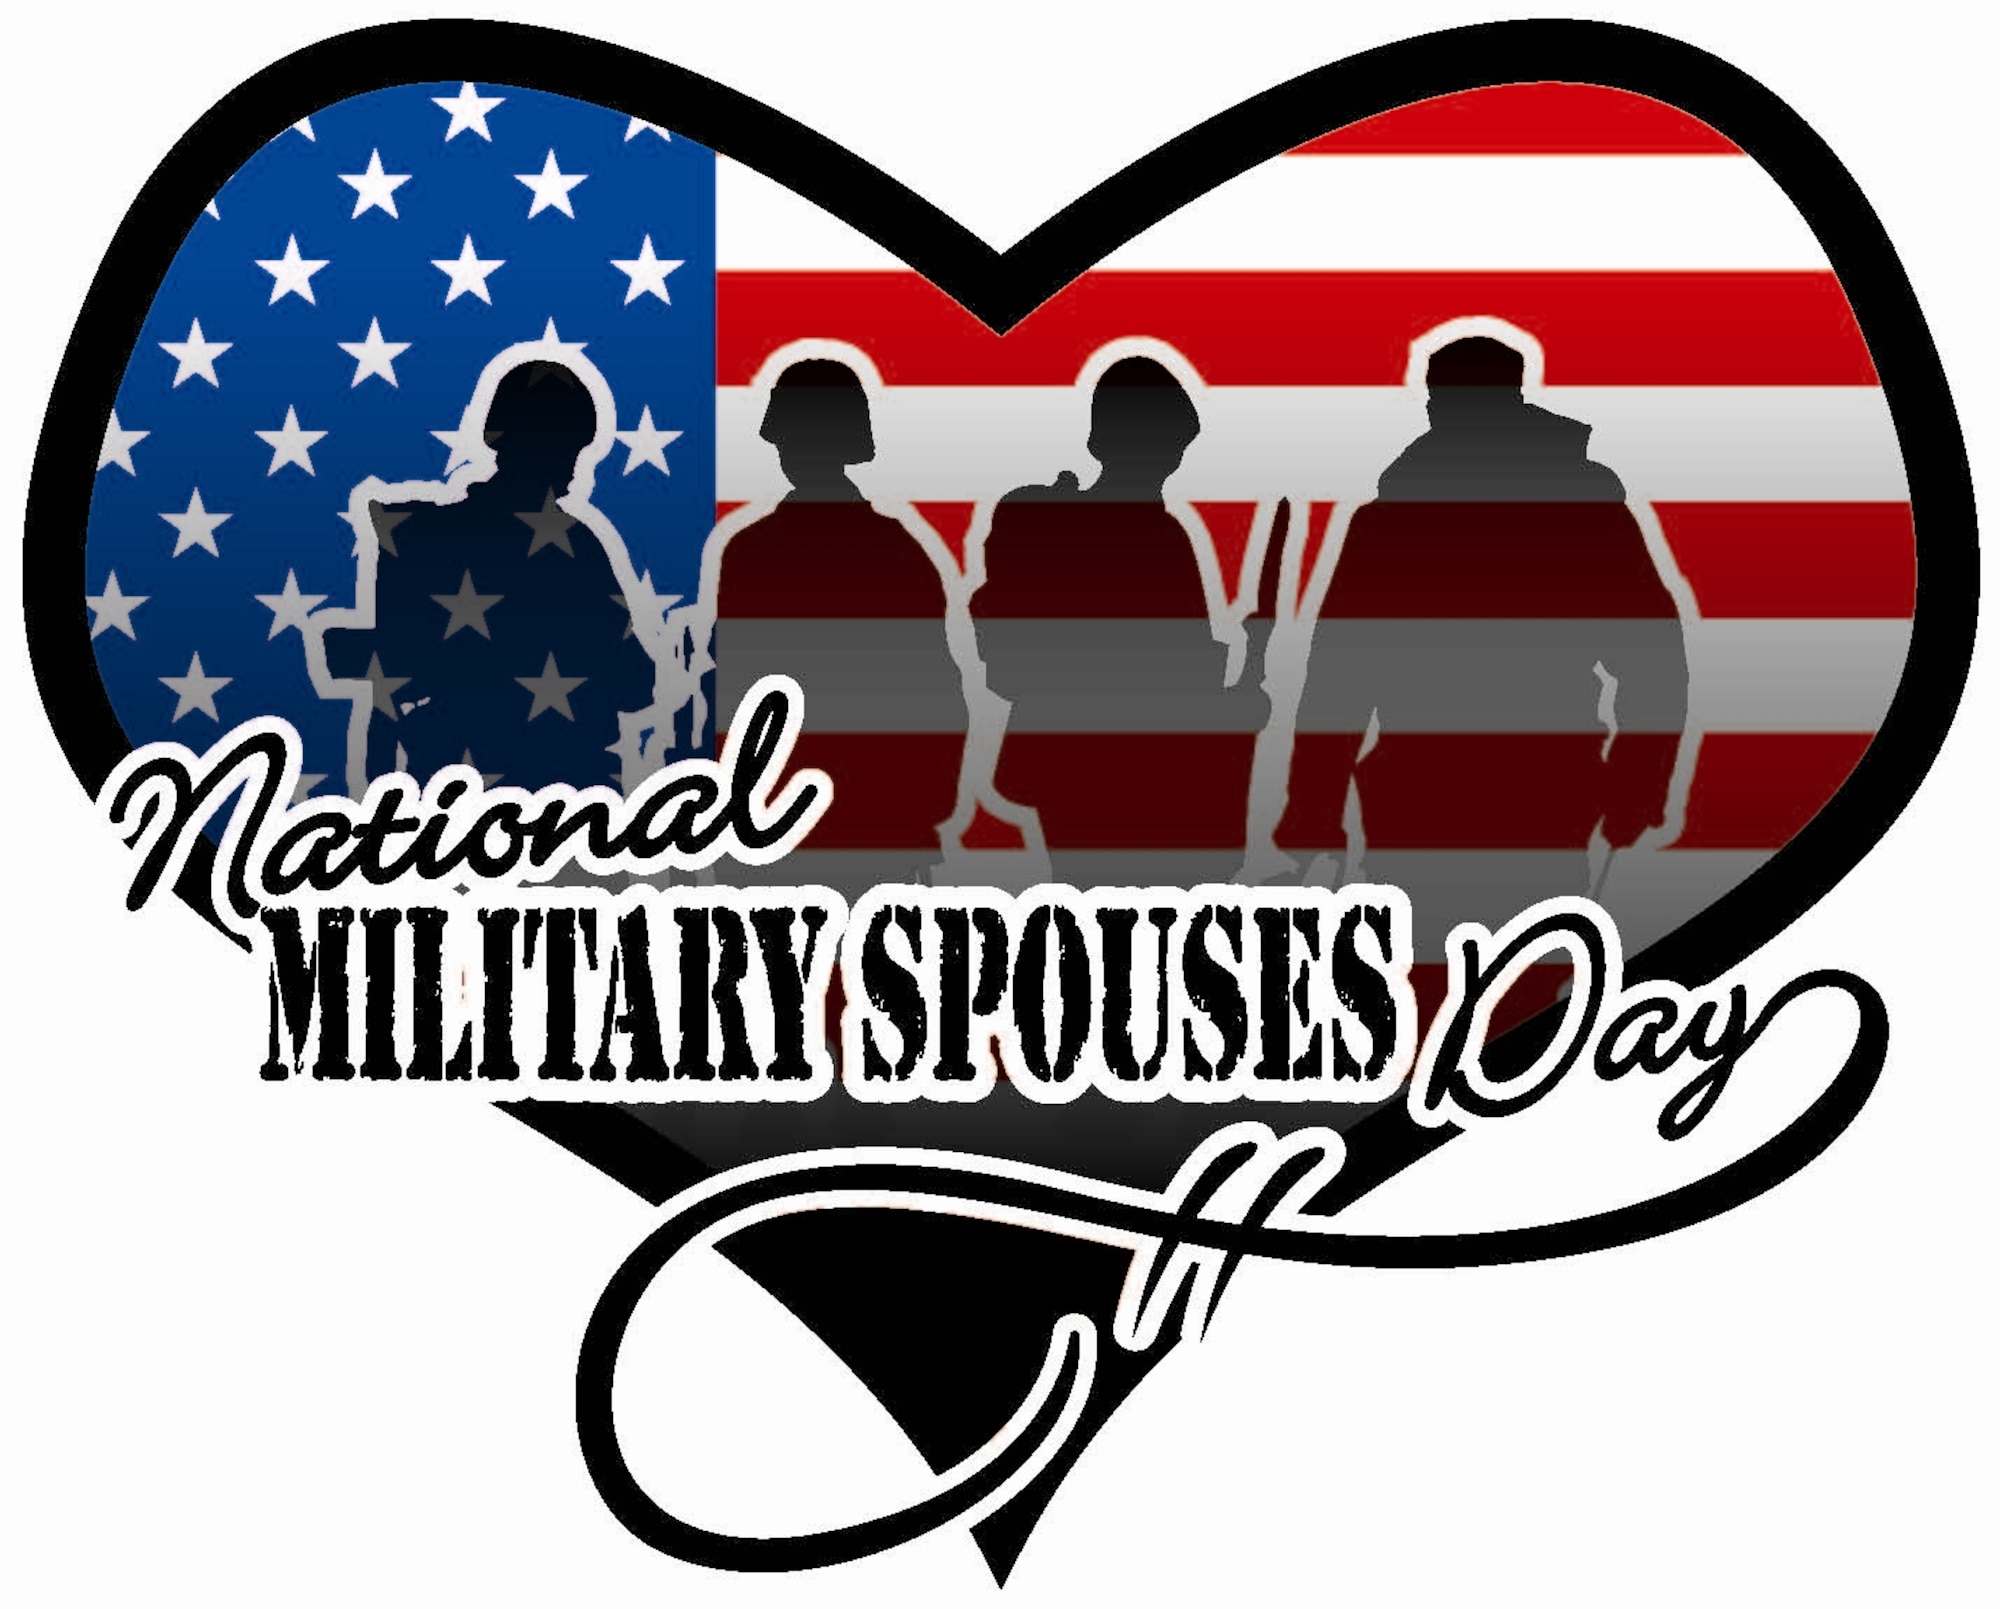 National Military Spouse Day is celebrated on May 9 across the Department of Defense. In conjuction with this, Moody will hold a local recognition event on this day from 8:30 a.m. to 2 p.m. outside the Freedom I Fitness Center. (Graphic by USAF SSgt Nicholas Hall)